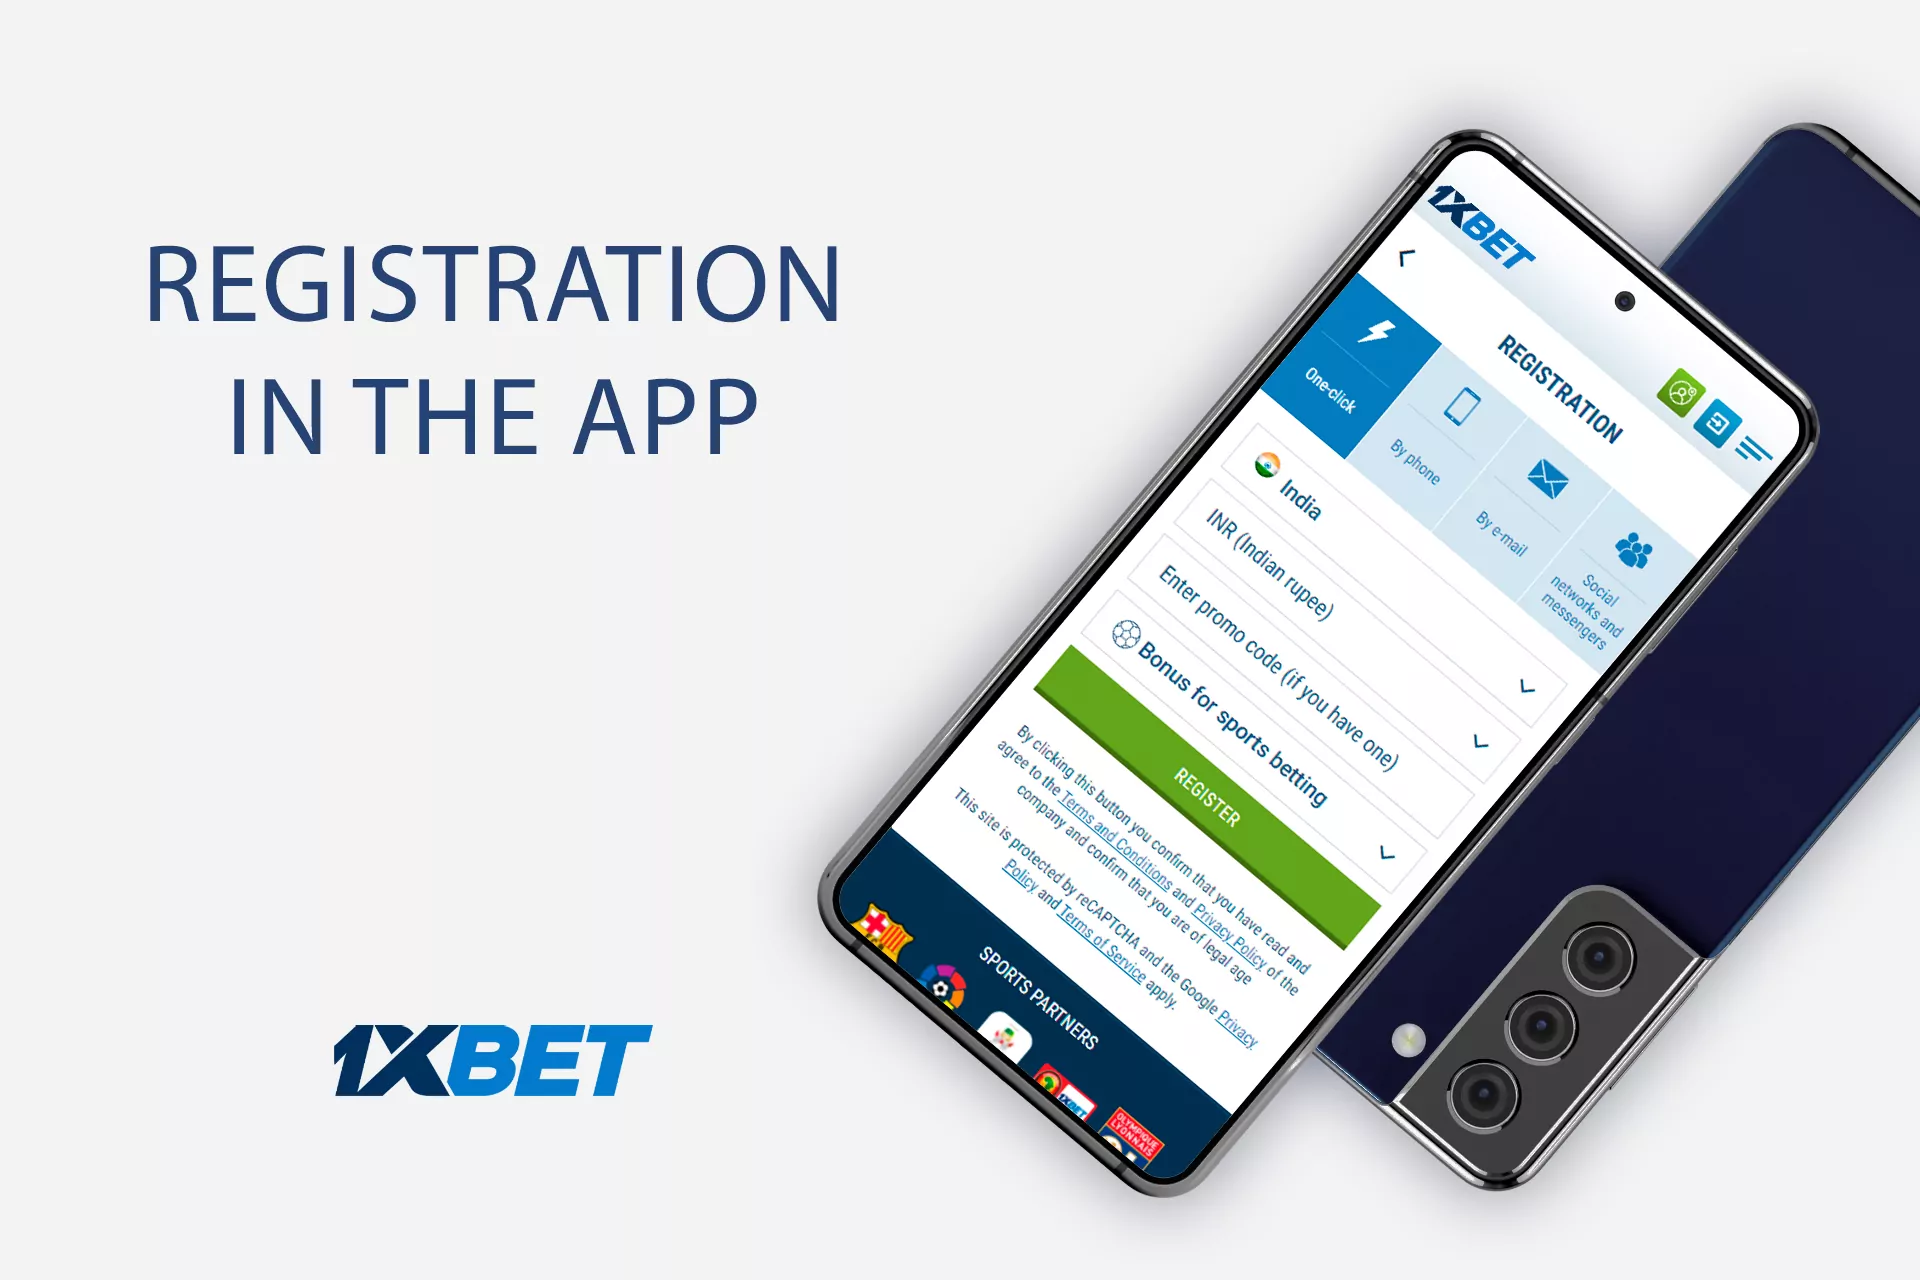 Register your 1xBet account through the official app.